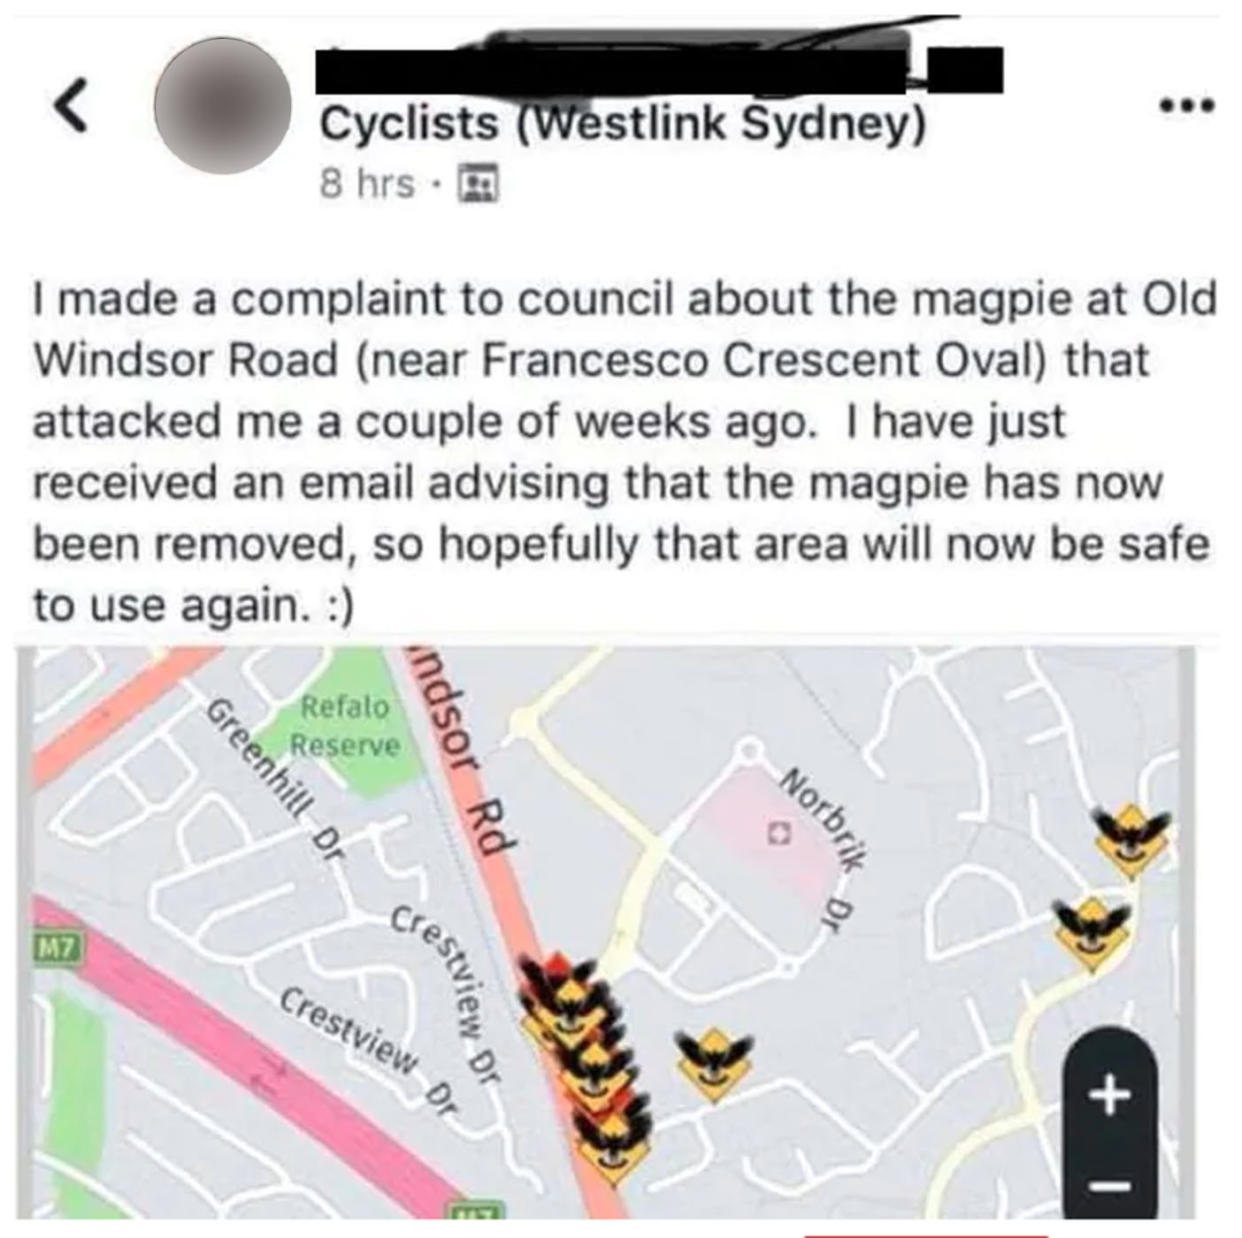 A problem magpie was reportedly killed following a complaint by a cyclist who reported being attacked near Old Windsor Rd, Bella Vista. A screenshot of a Facebook post confirming what happened to the bird.